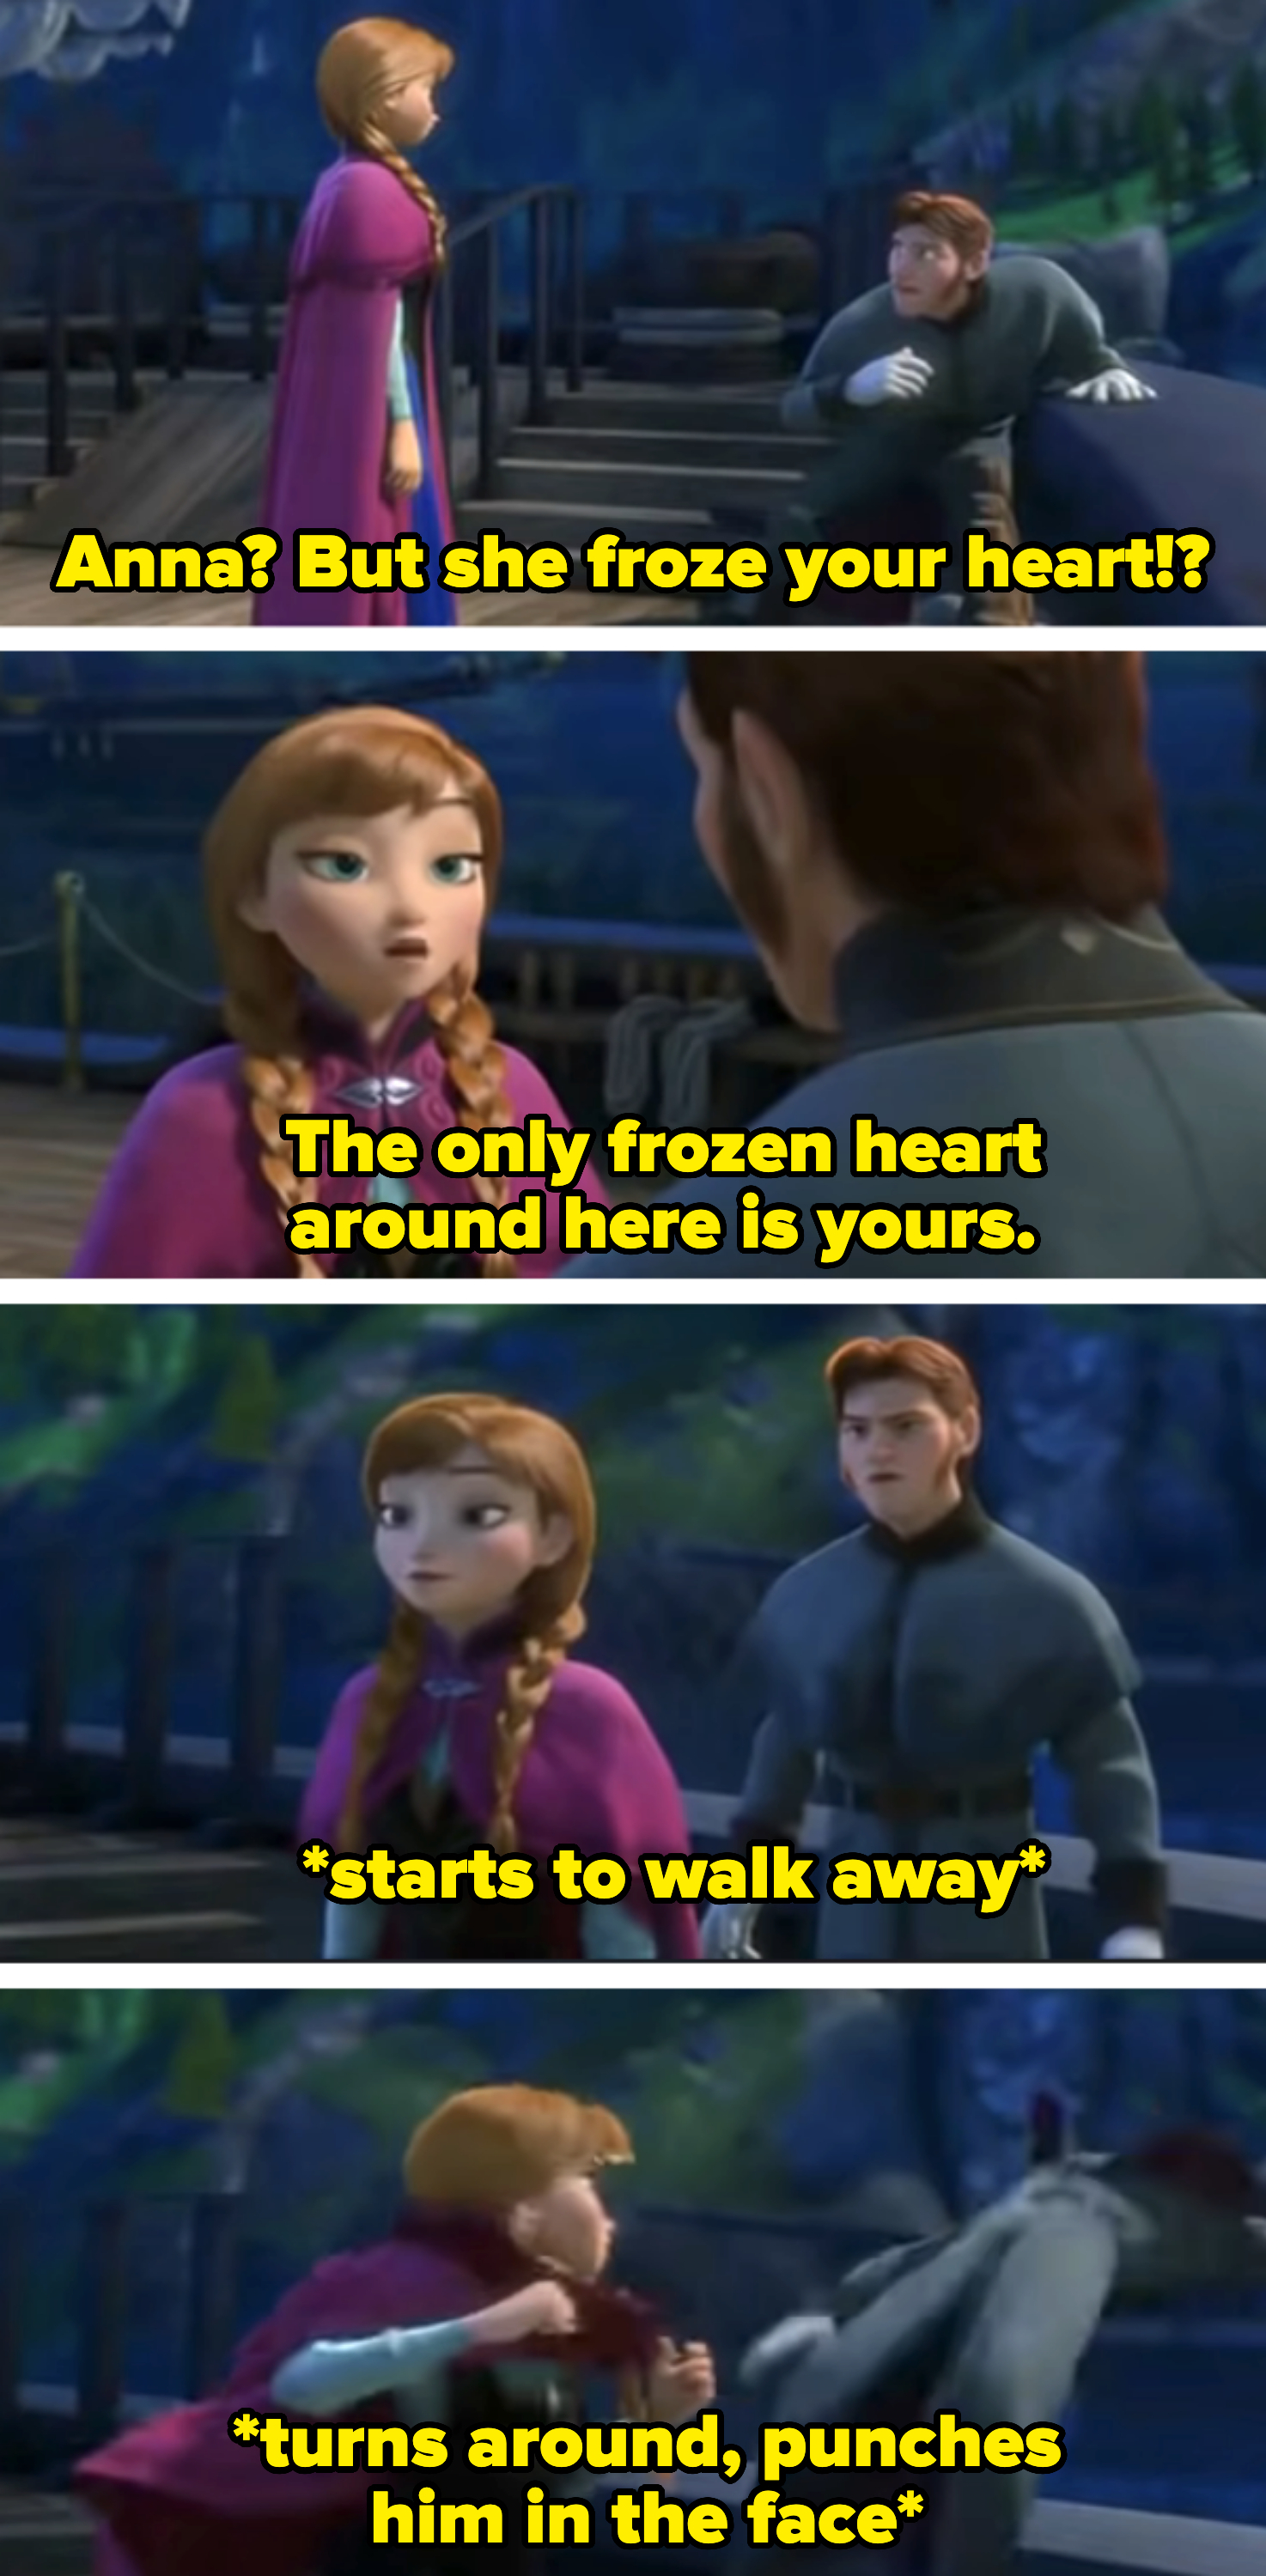 Animated characters Anna and Kristoff from Frozen are shown in a sequence; Anna looks concerned, Kristoff is kneeling, and Anna consoles him